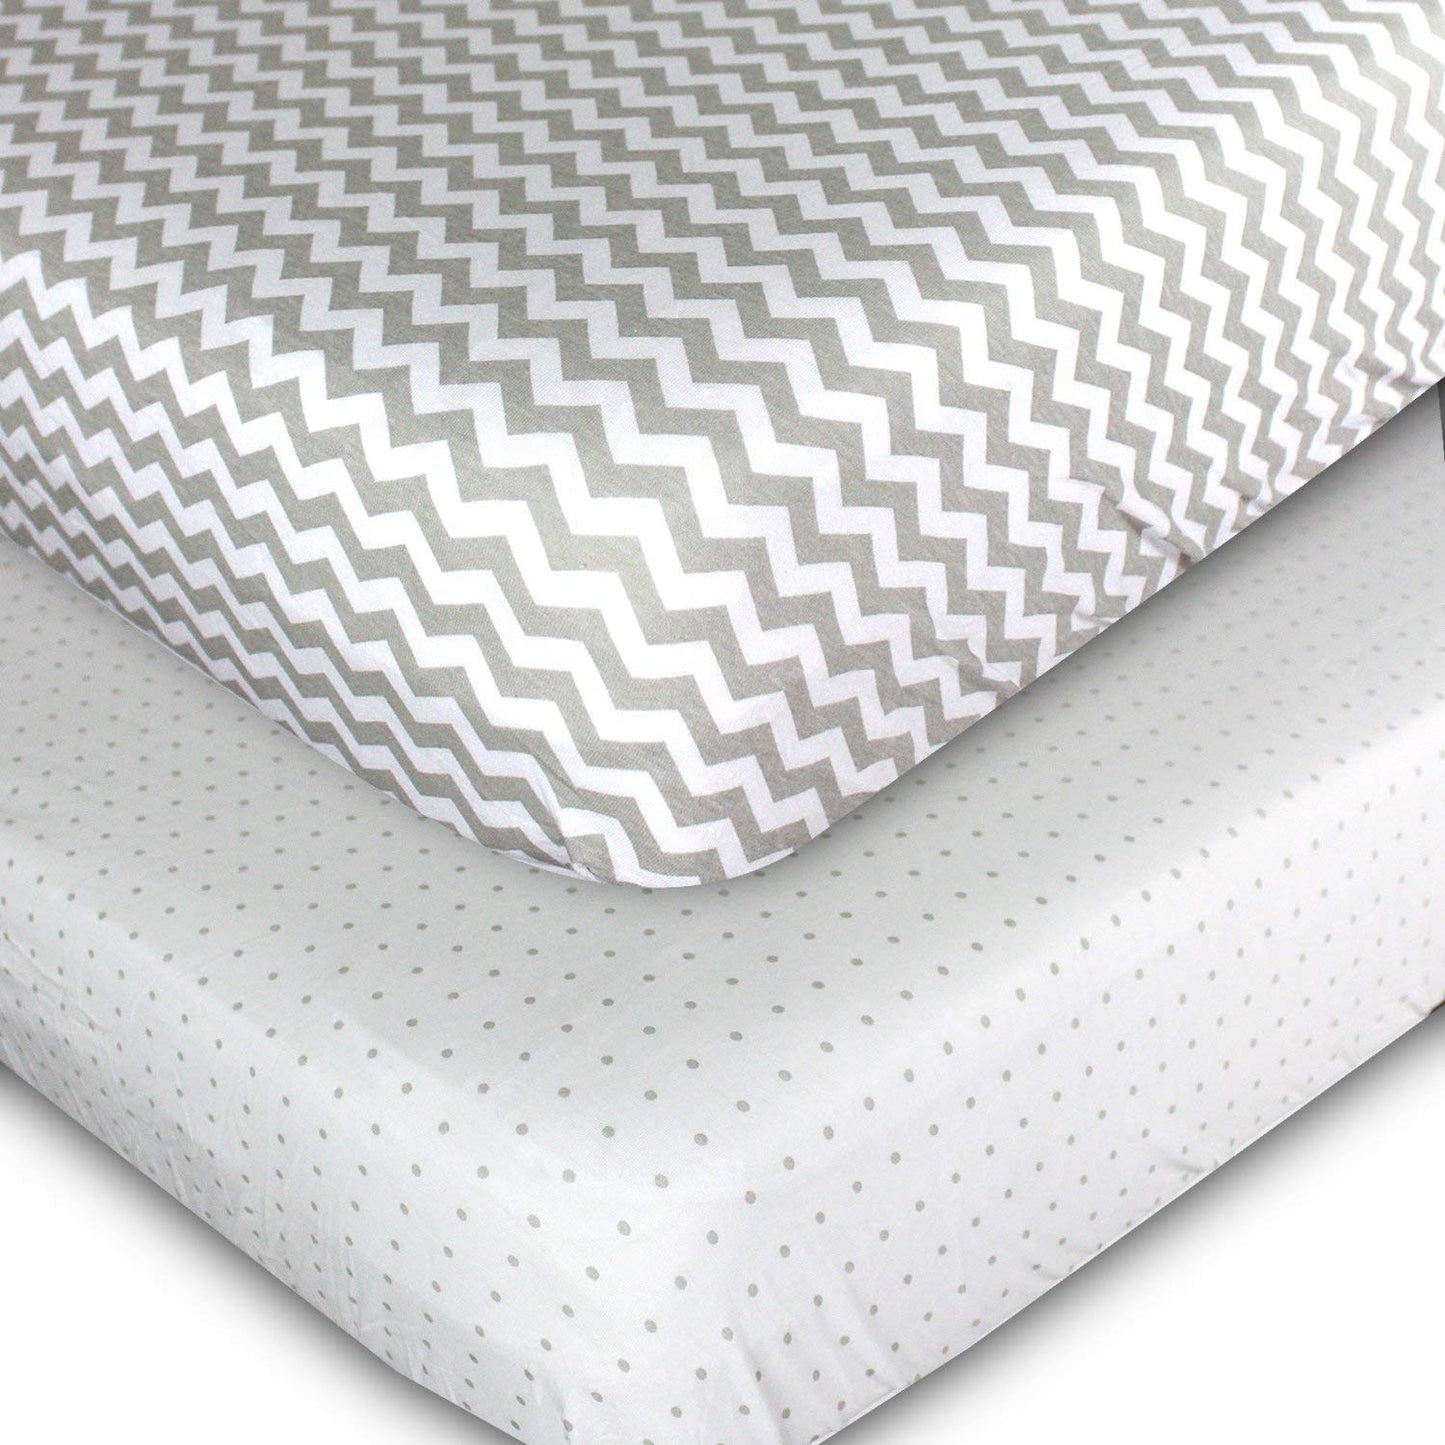 Toddler Bedding Fitted Jersey Cotton (2 Pack) Grey Polka Dot, Chevron